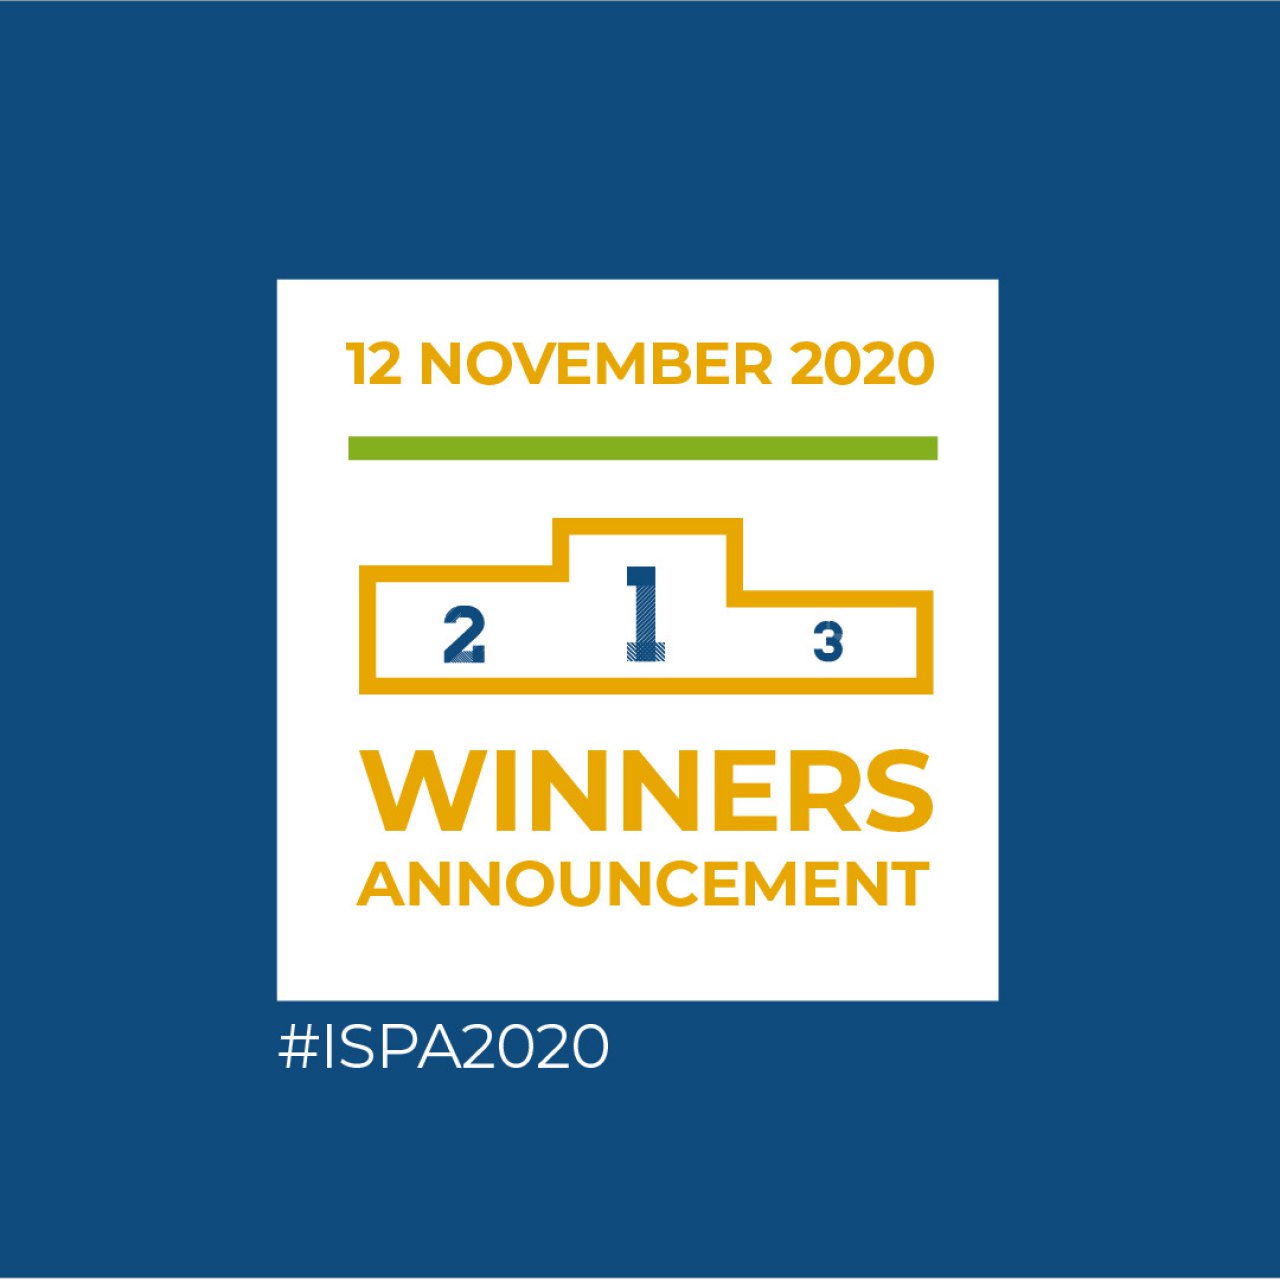 The ISPA 2020 winners will be announced on 12 November. 